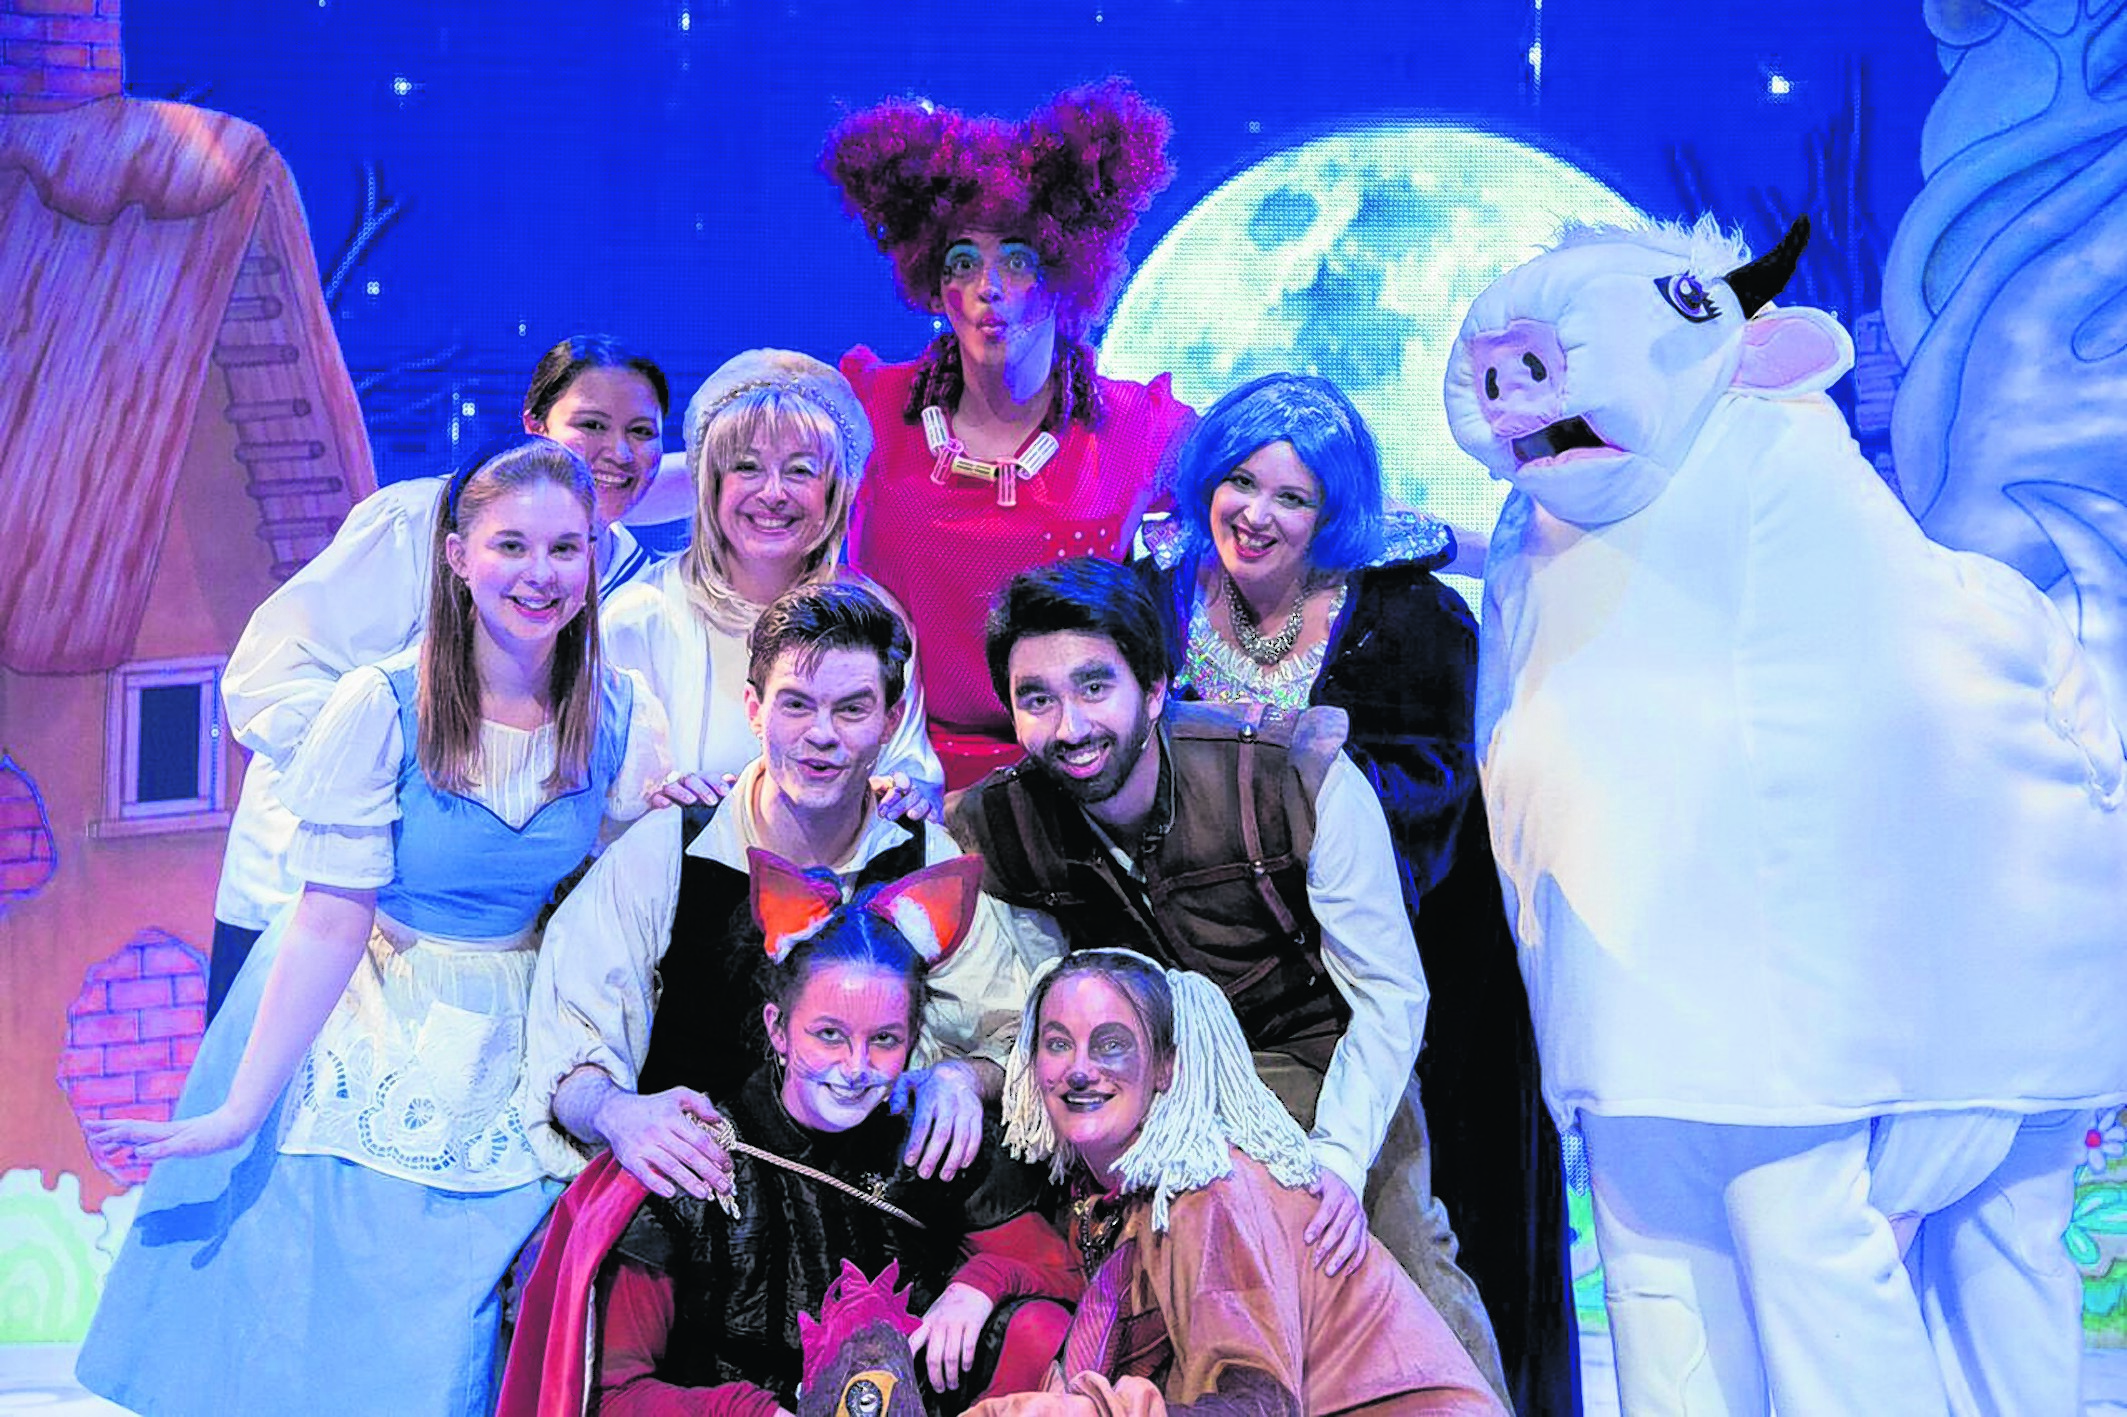 The Jack and the Beanstalk cast